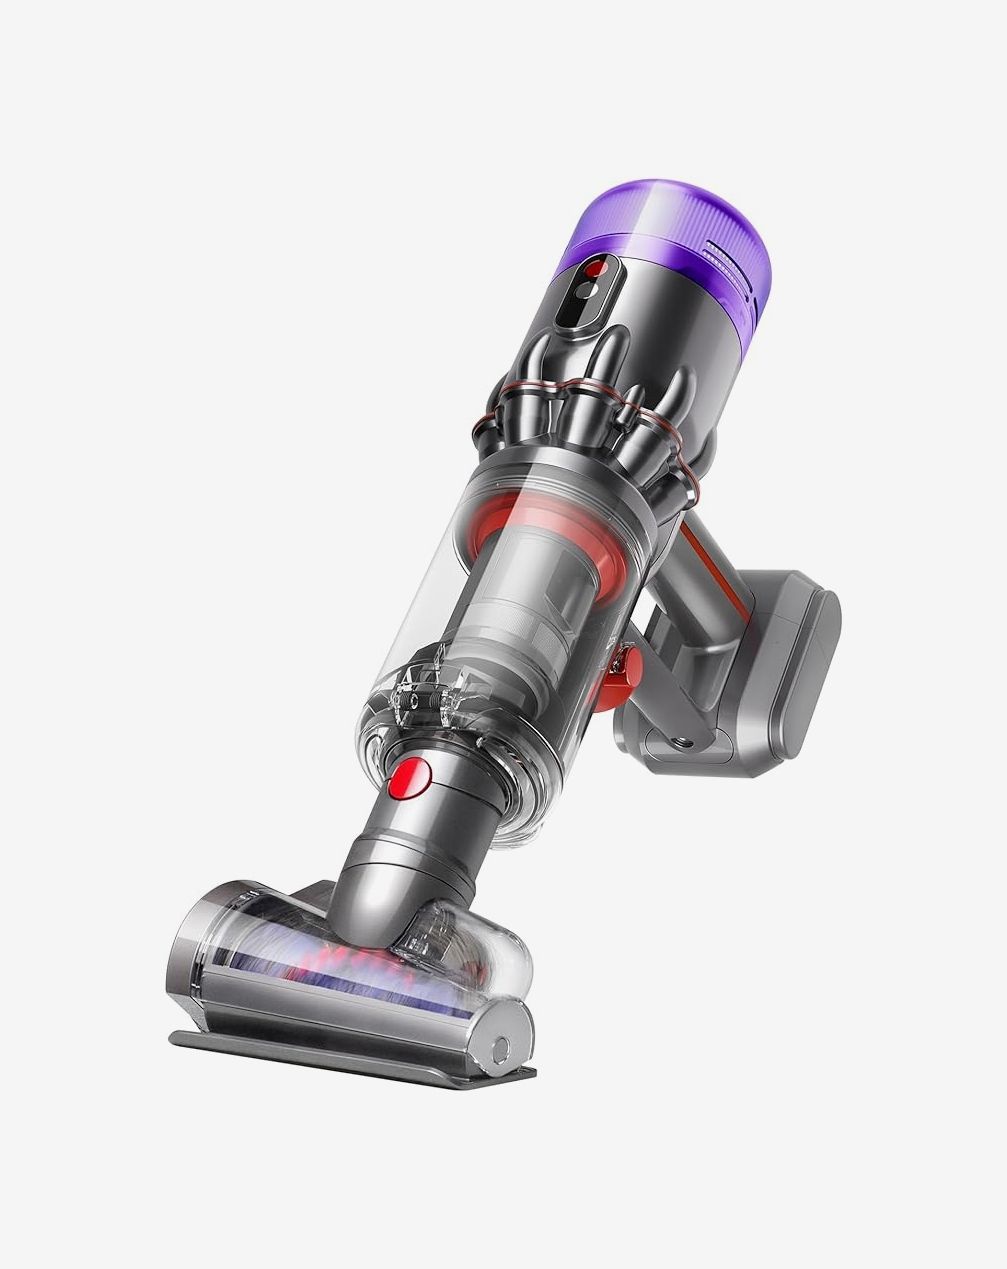 How to Improve Quality of Life with a Dyson Vacuum (+ Free Checklist)